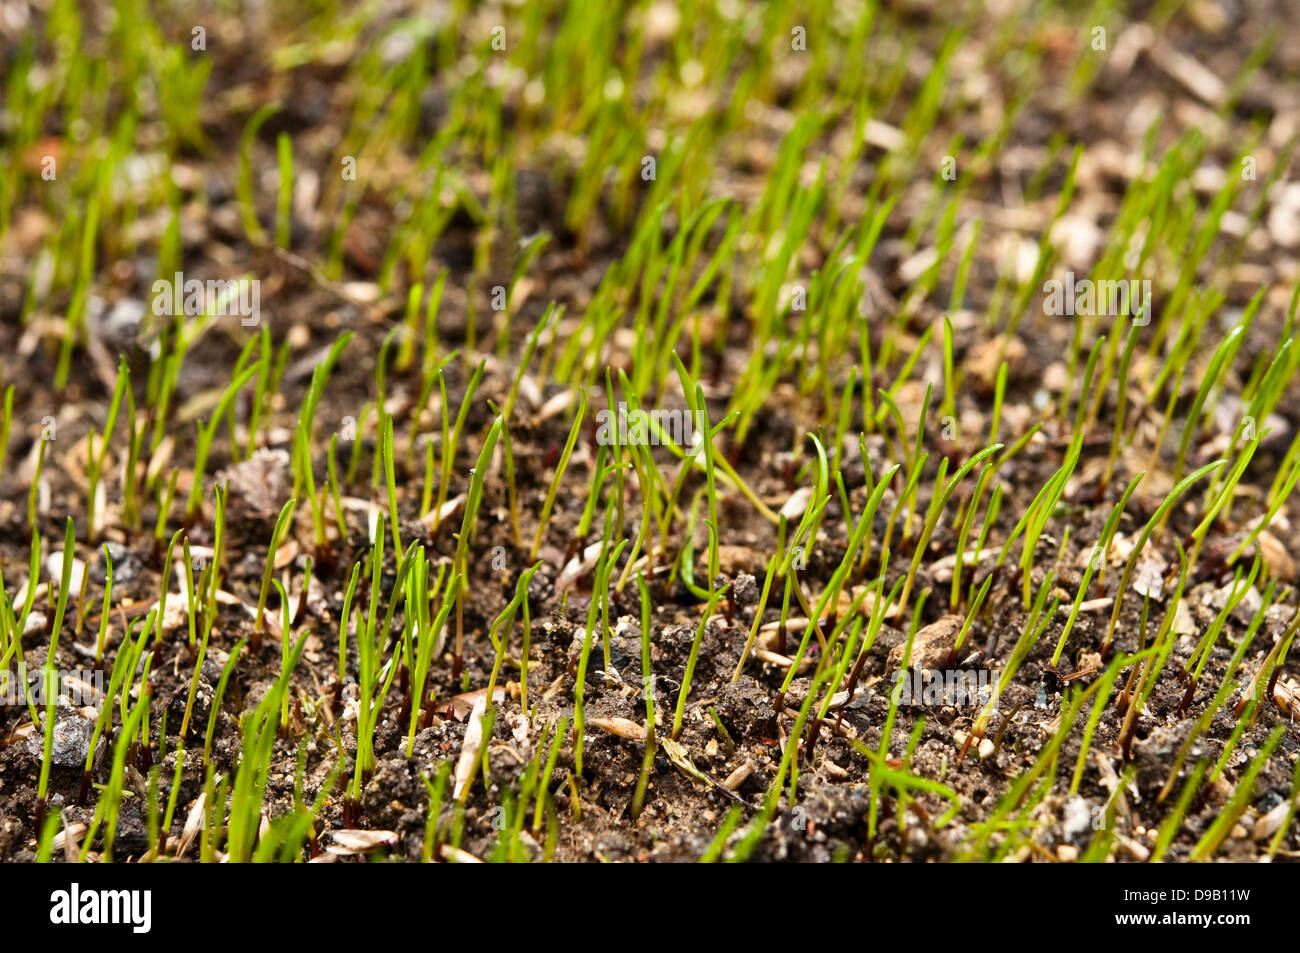 Grass seeds and seedlings. Stock Photo